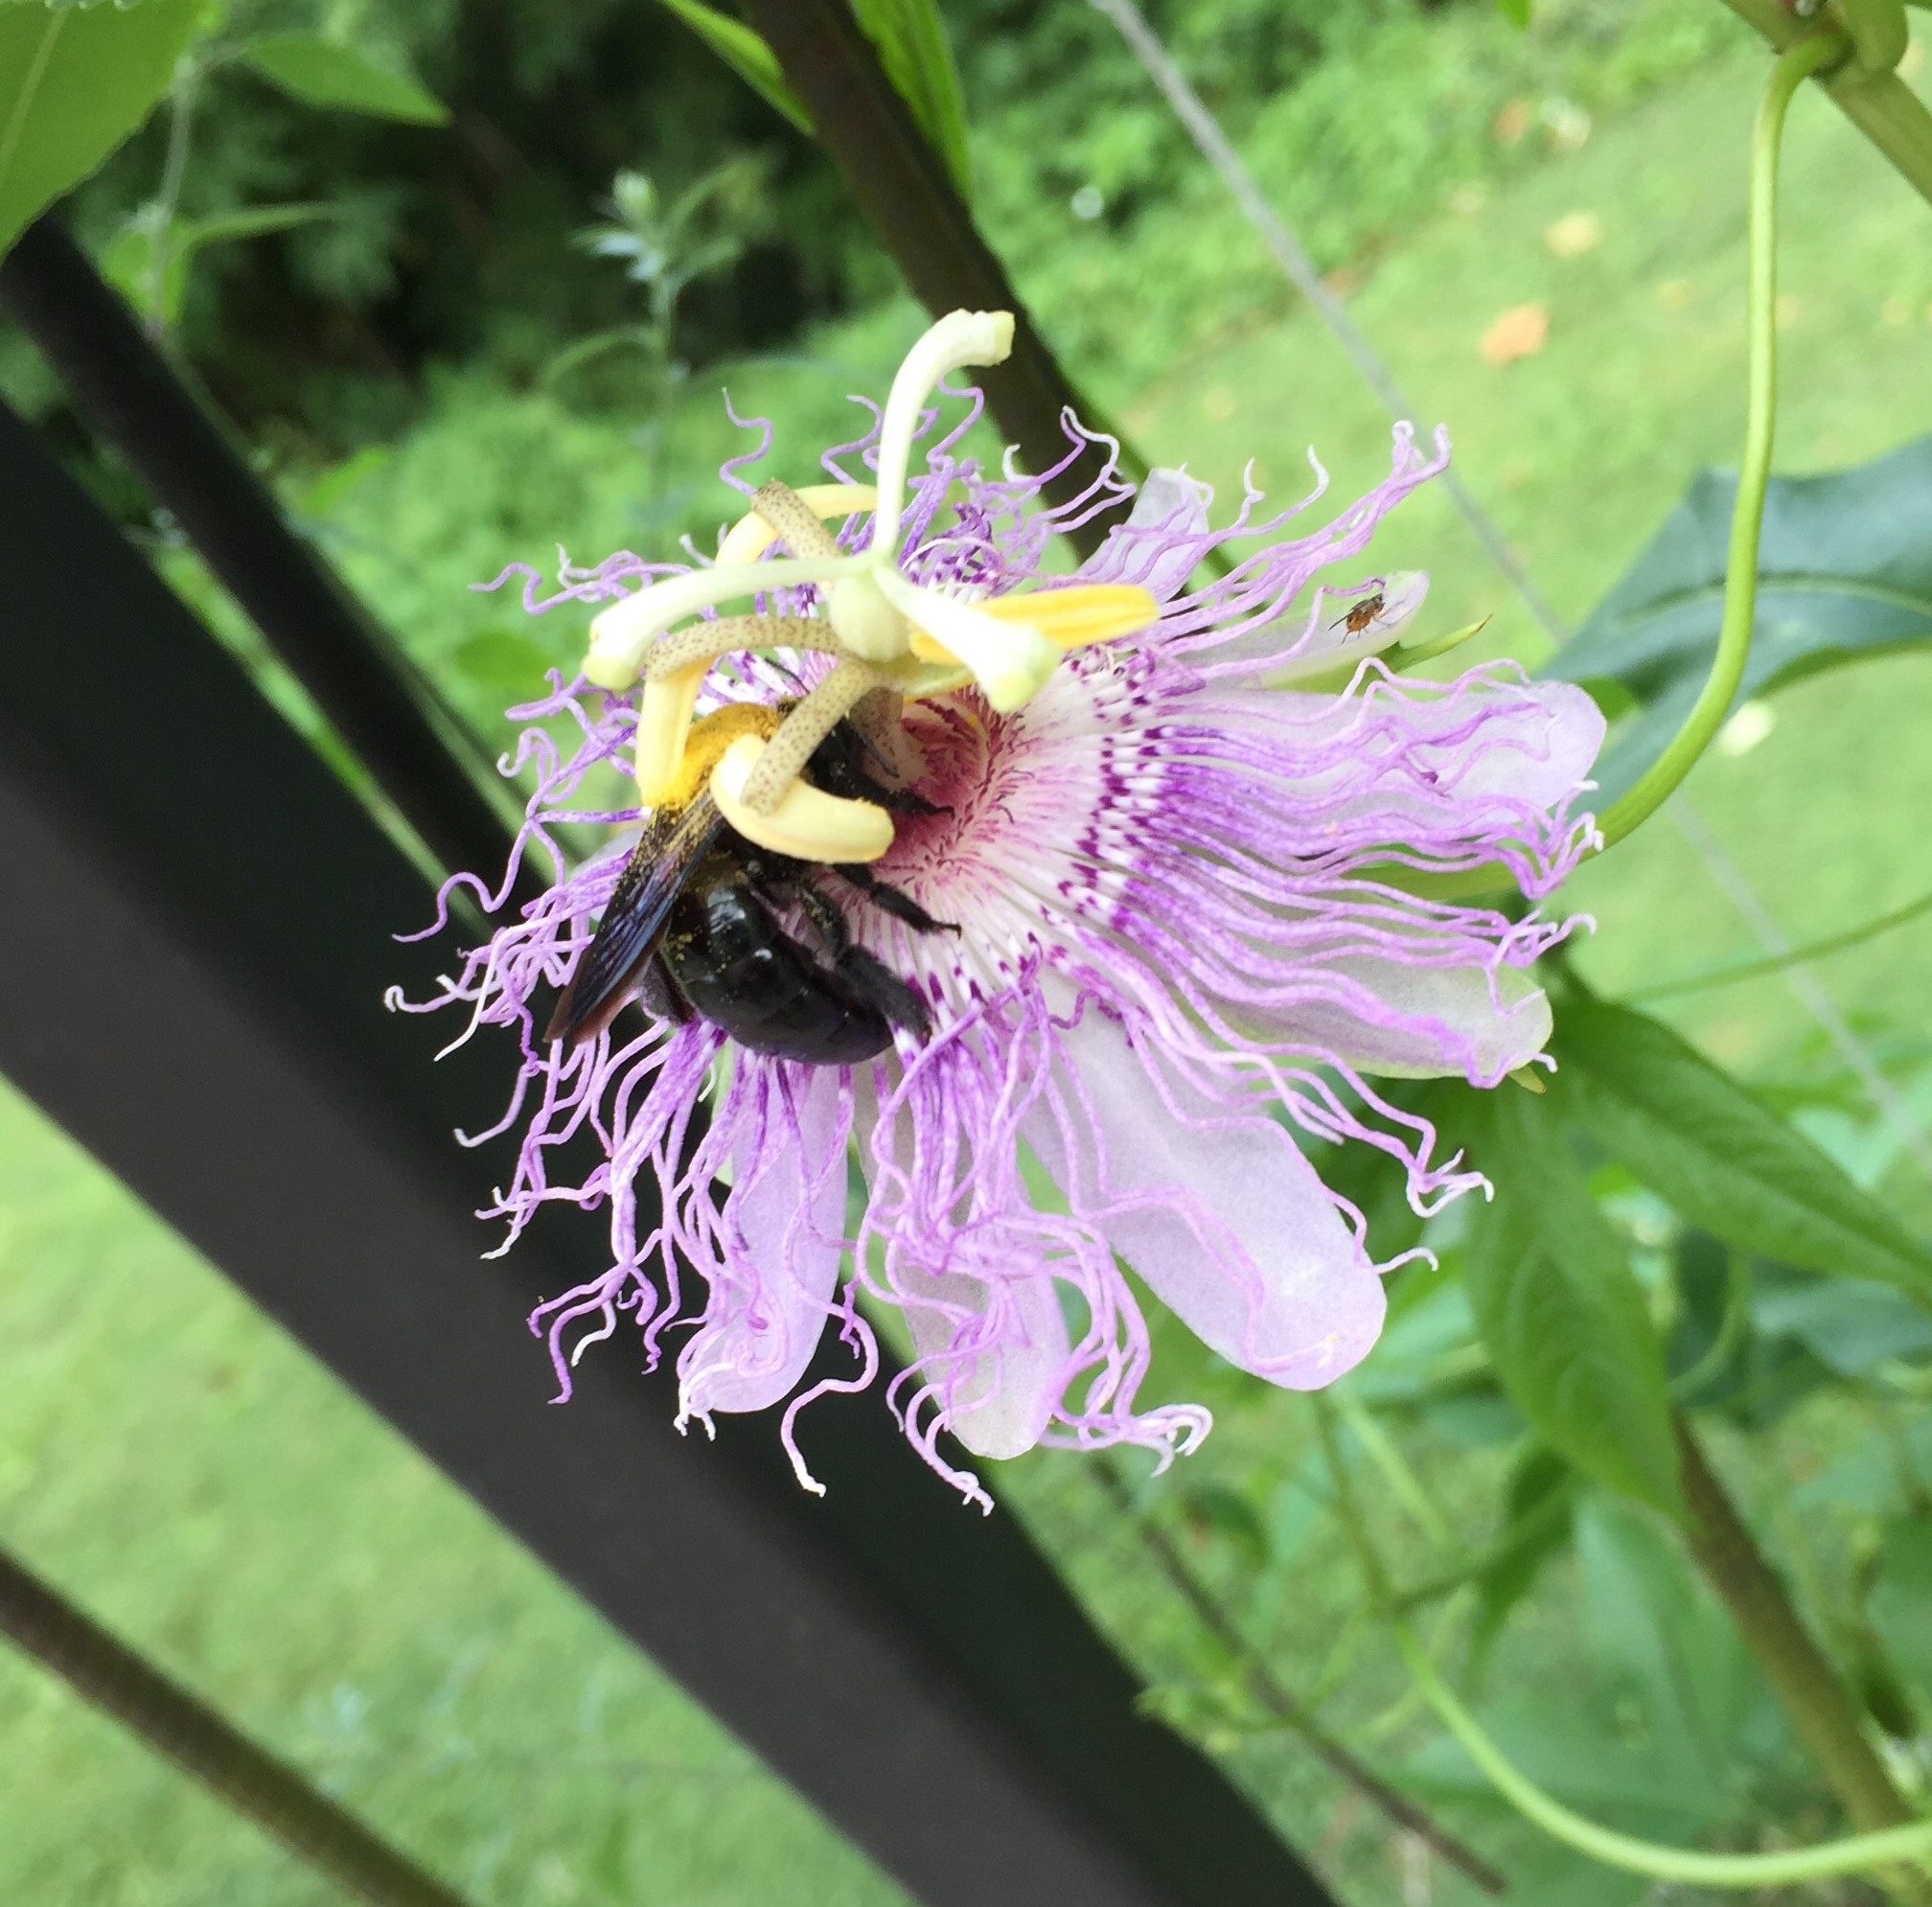 Eastern Carpenter Bee foraging on purple passion flower on my deck. Photo by Gayle Fritz.